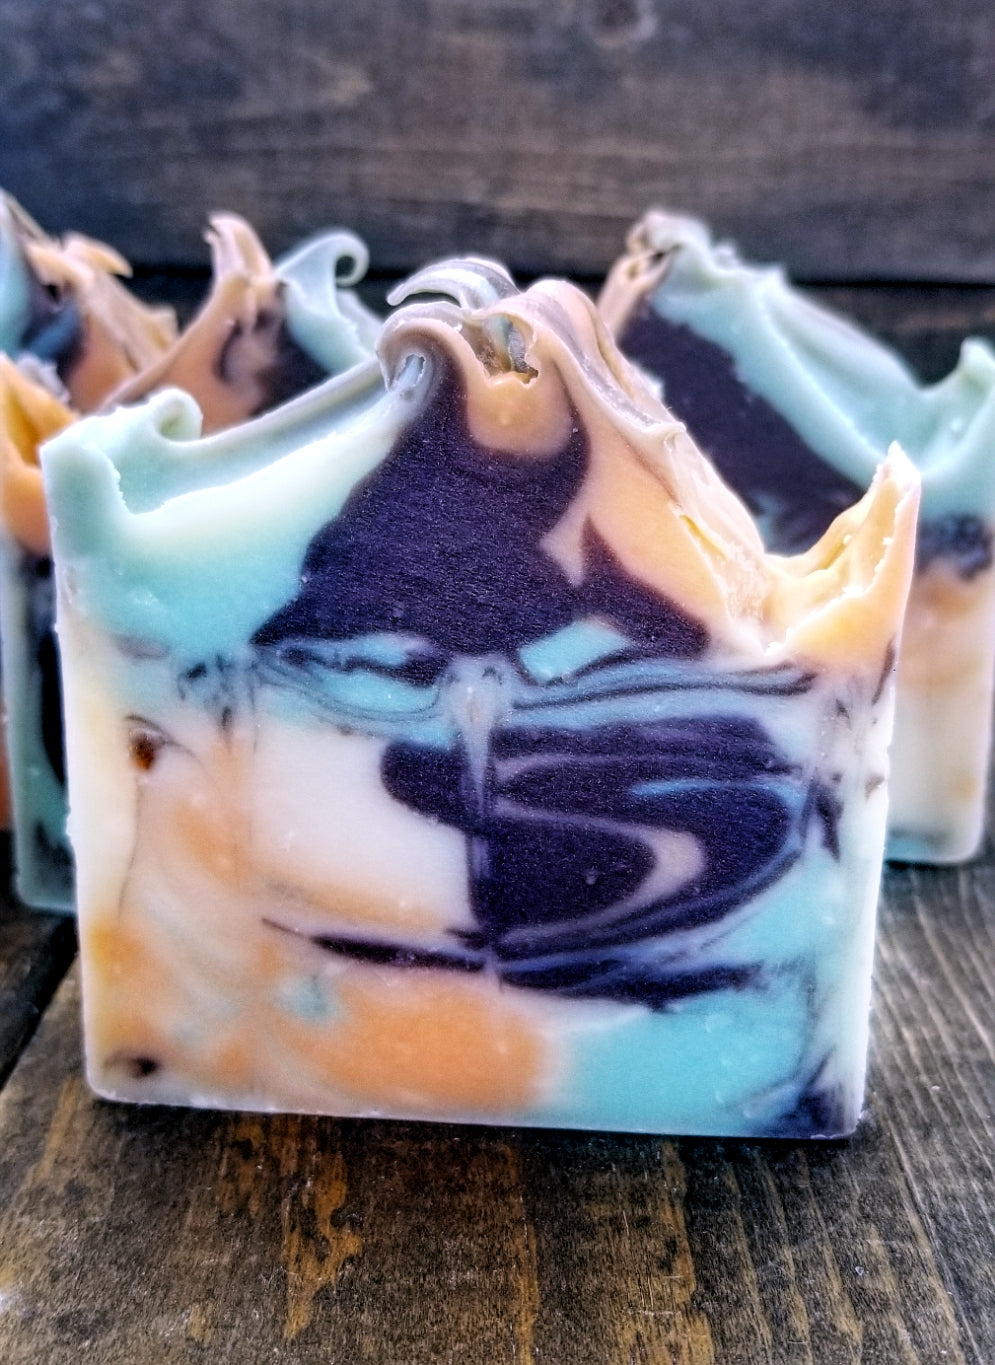 Sophisticated Citrus Artisanal Soap - Willowisp Apothecary 